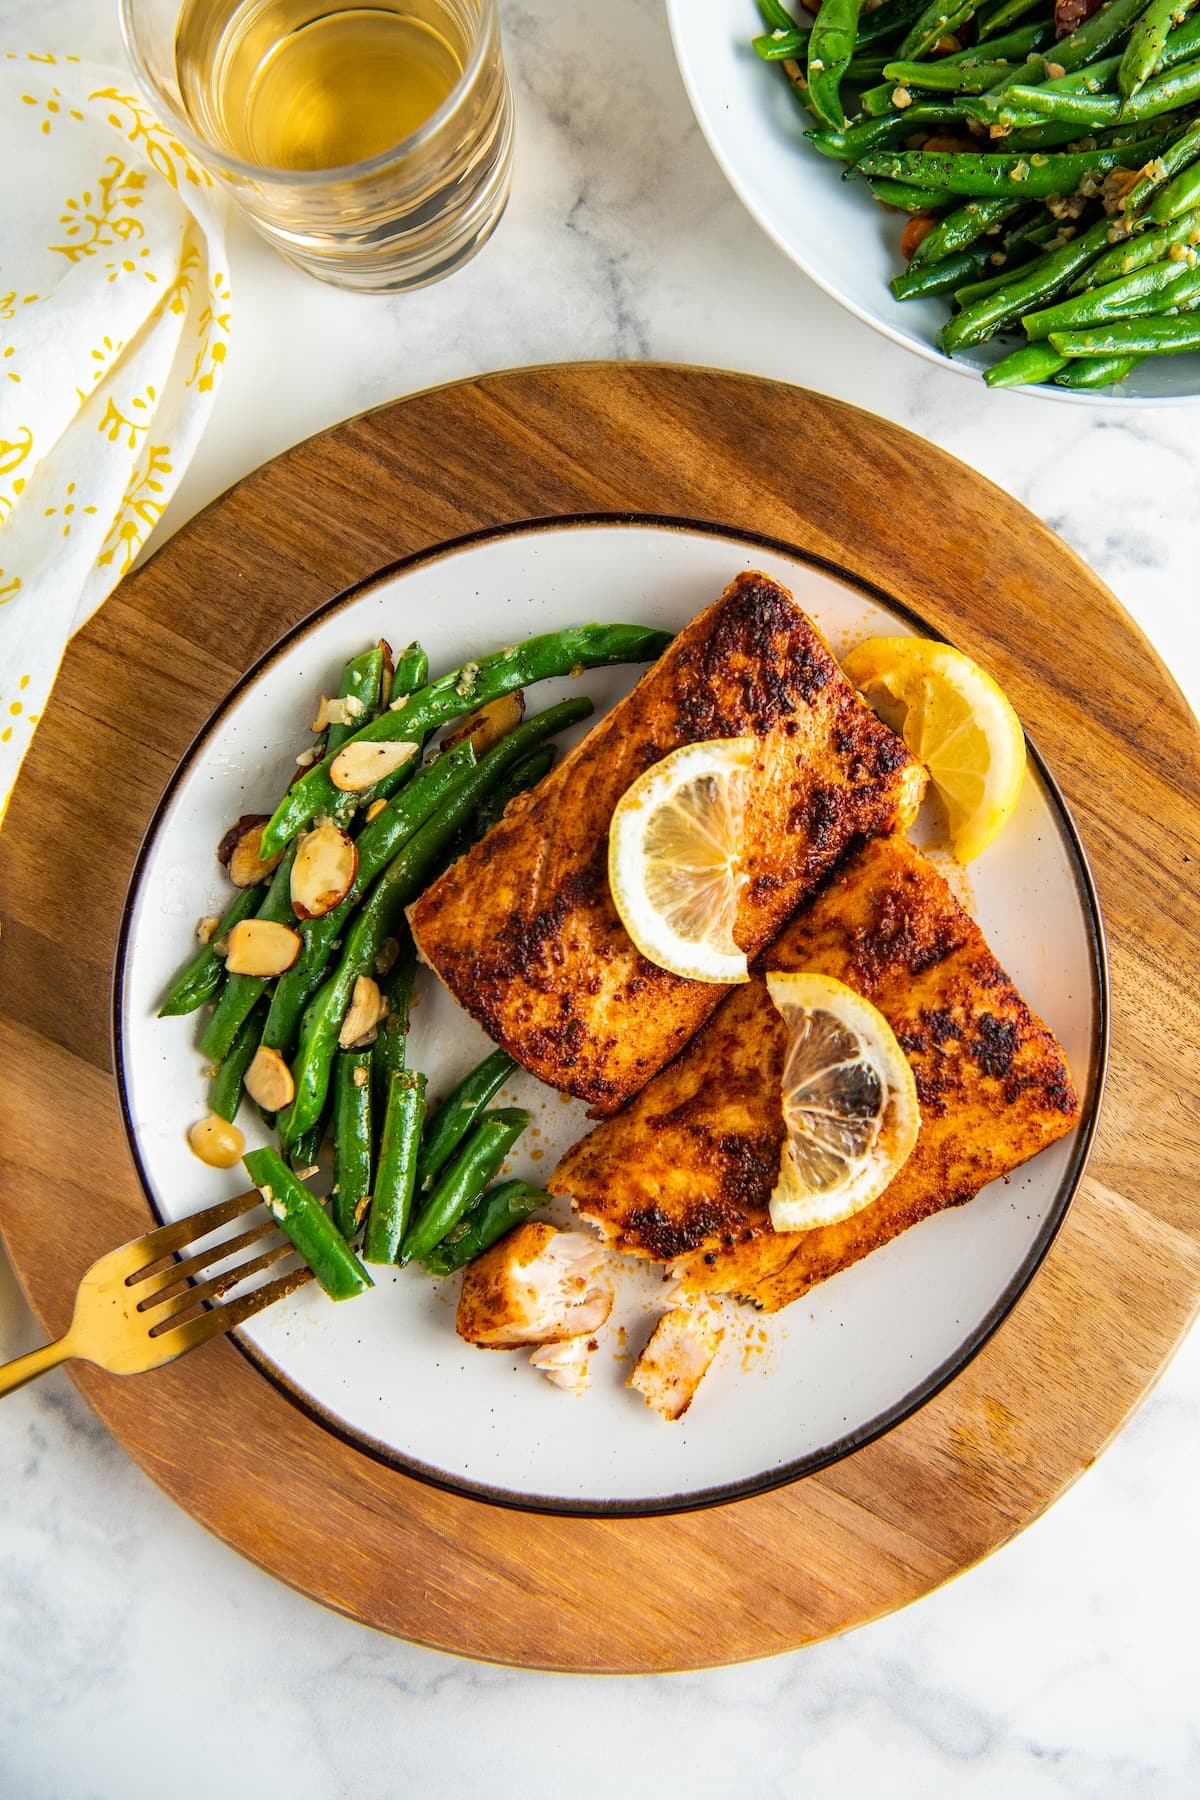 Overhead view of a plate of blackened fish topped with lemon, a side of green beans, and a fork